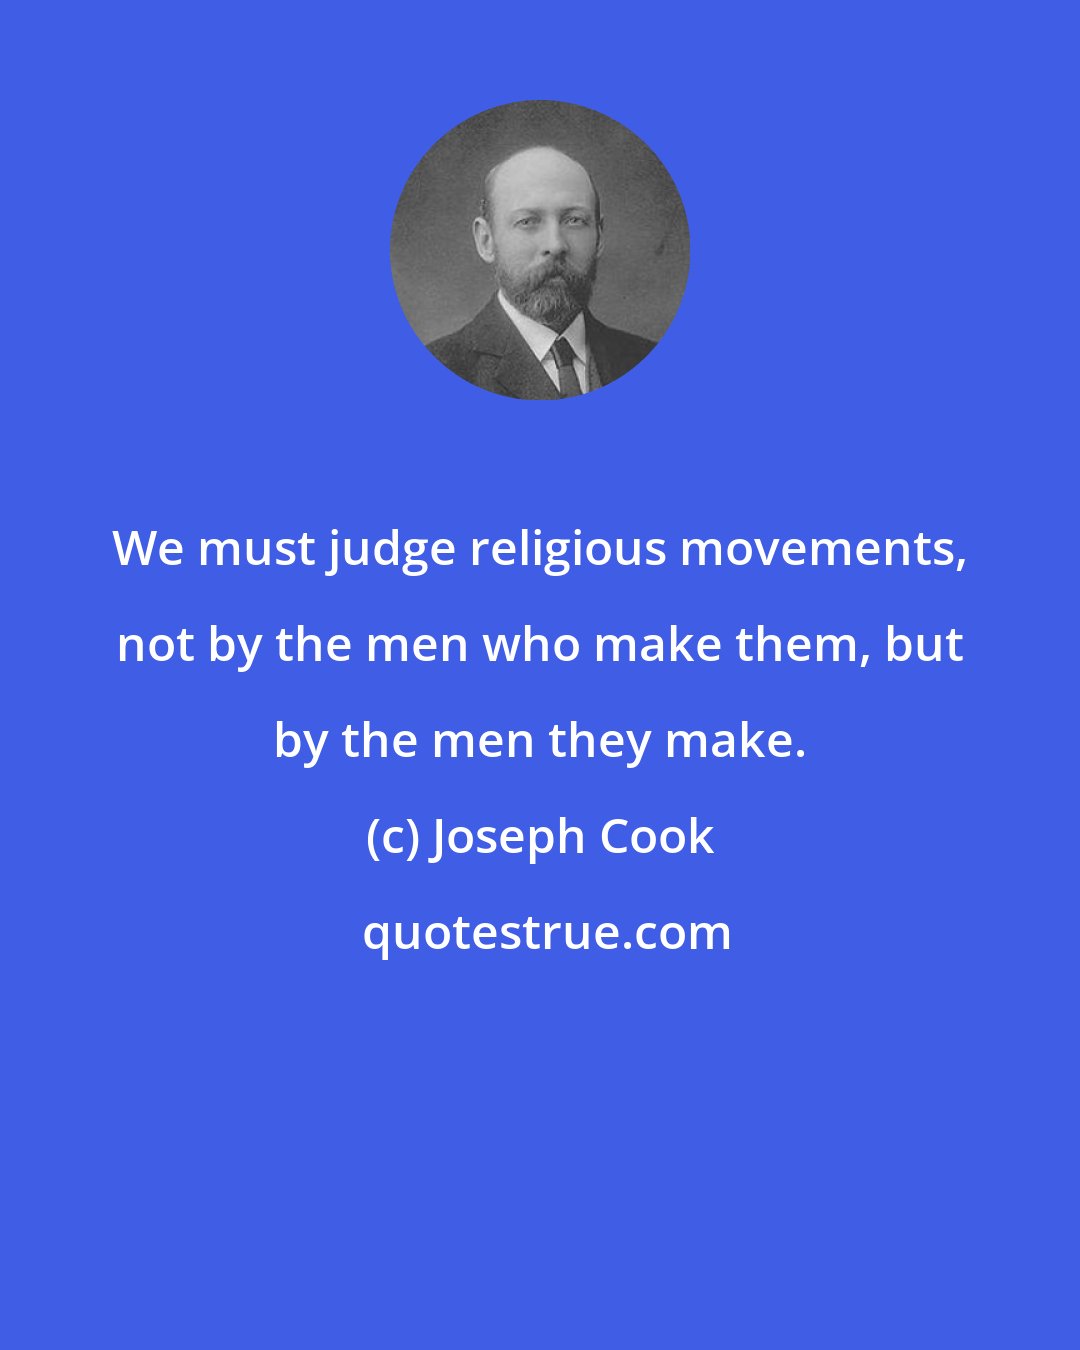 Joseph Cook: We must judge religious movements, not by the men who make them, but by the men they make.